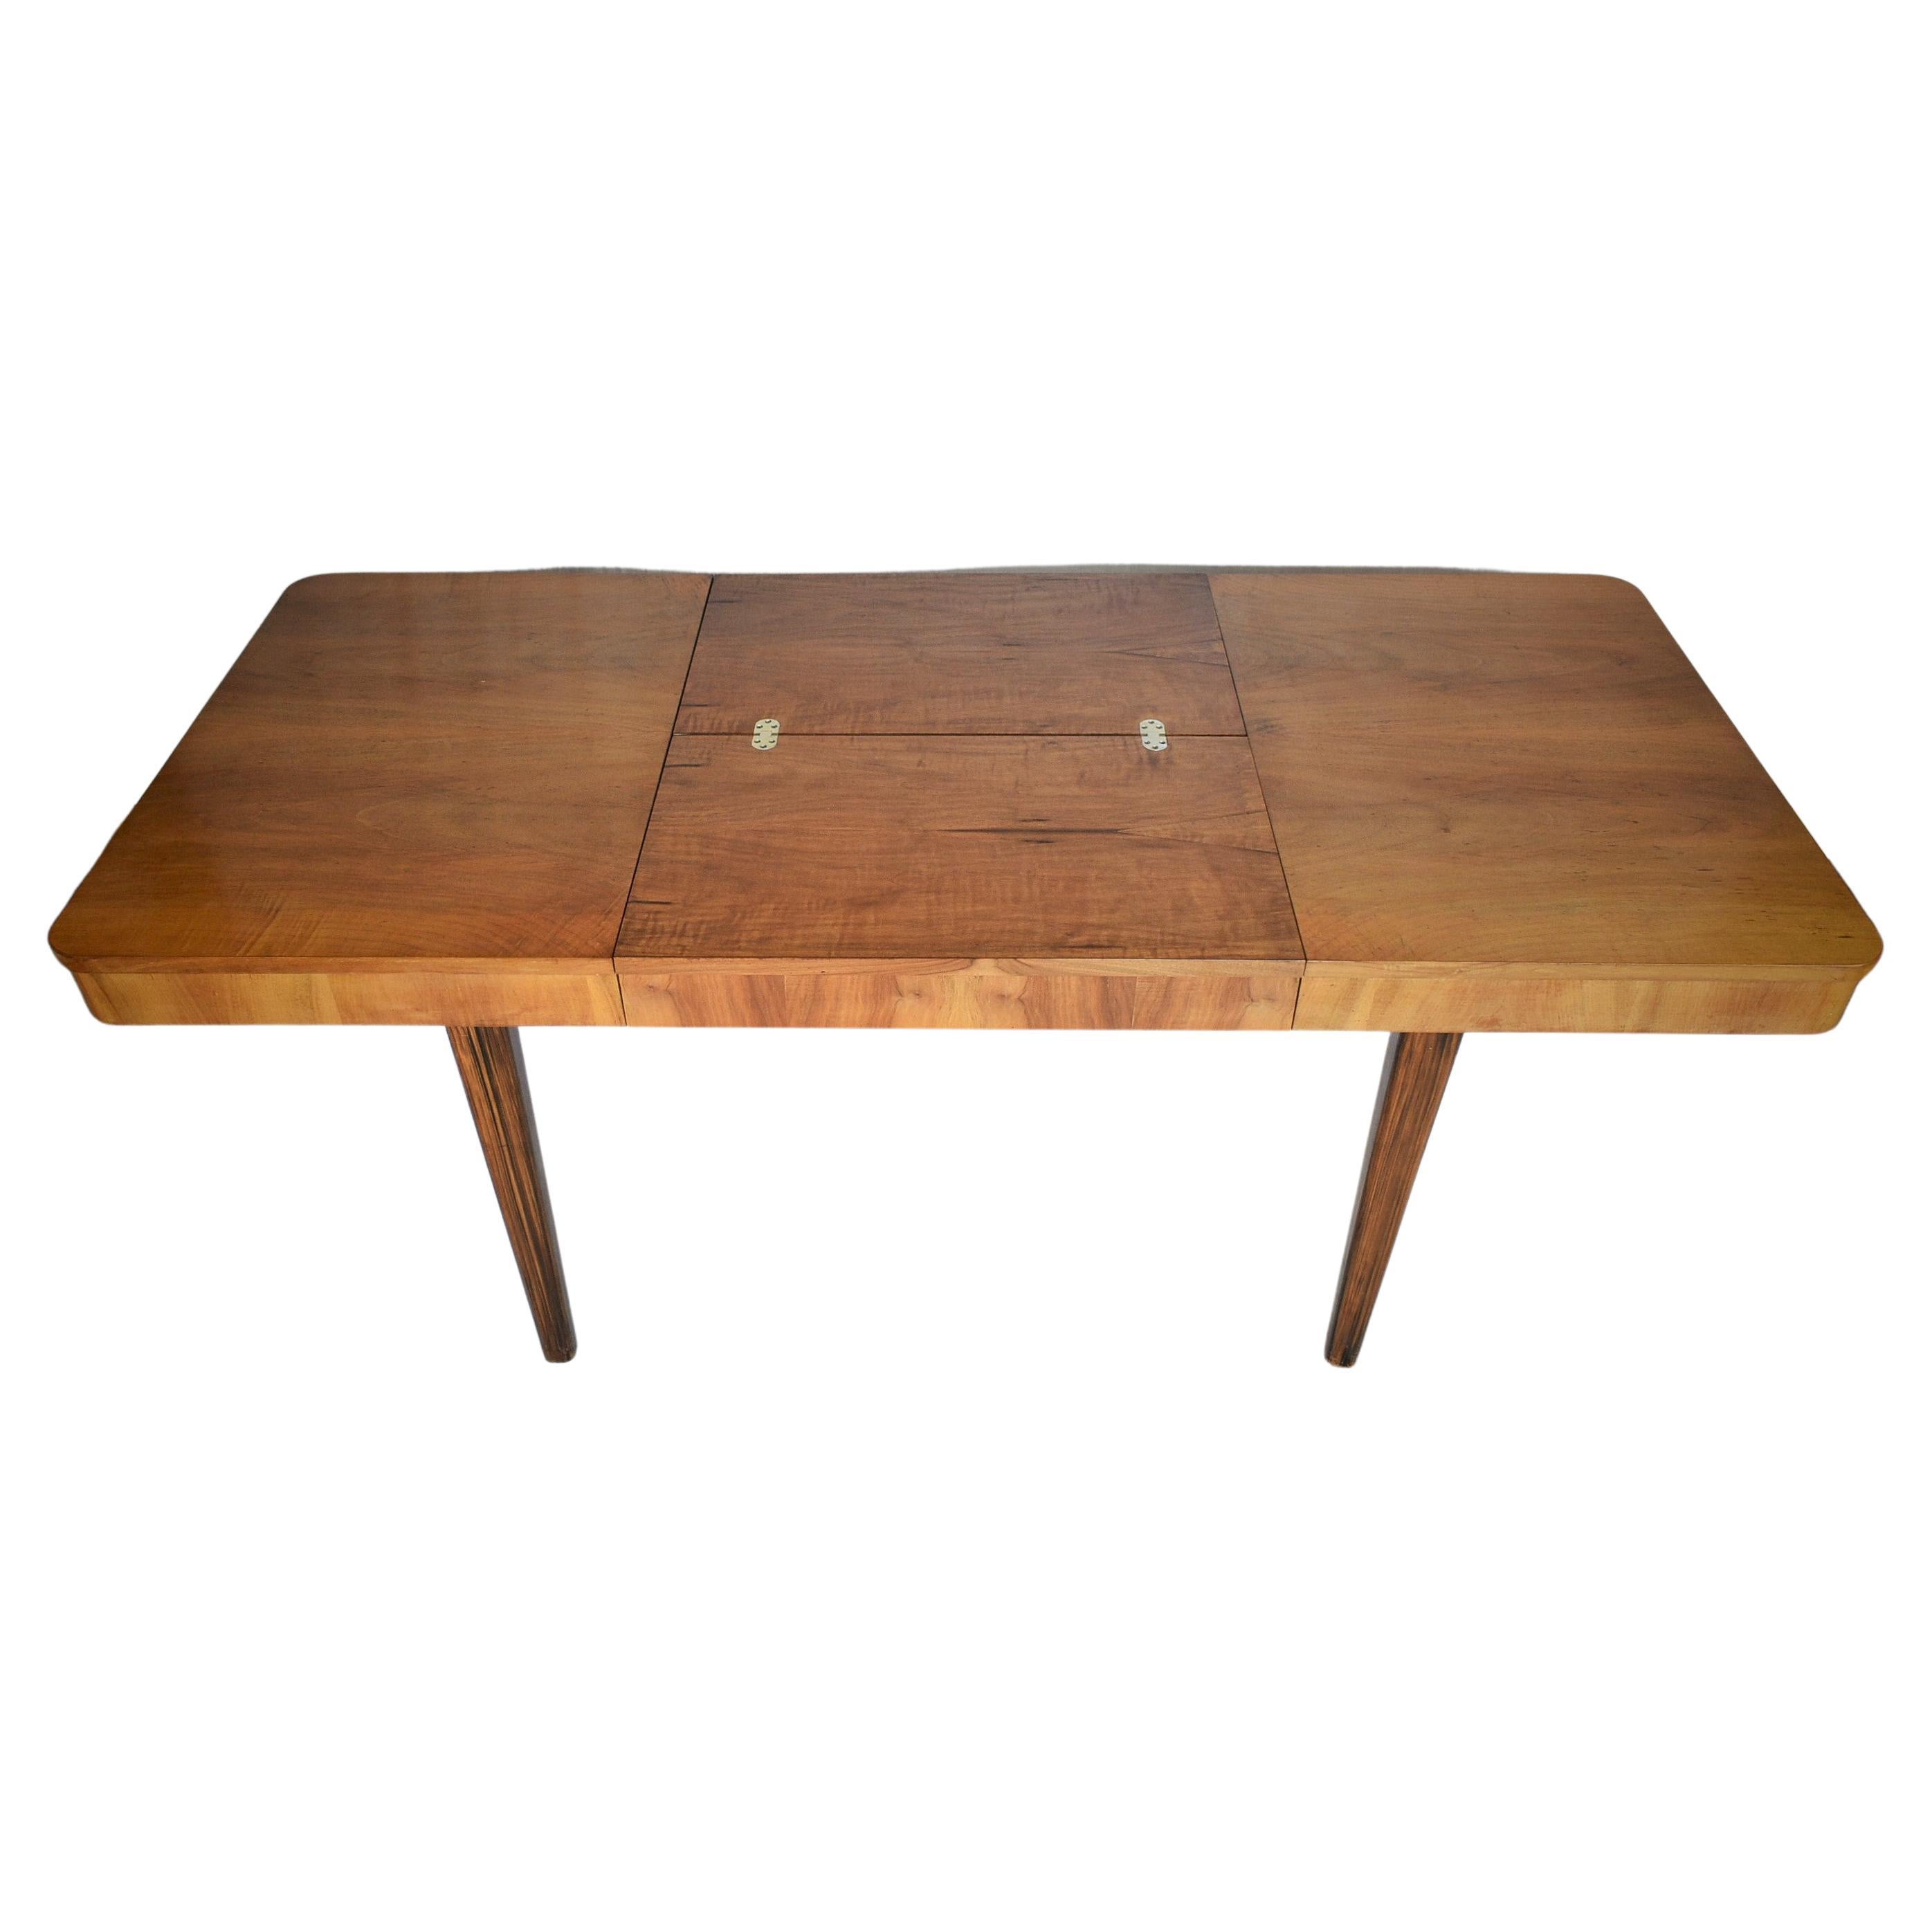 - Made in Czechoslovakia
- Made of wood
- Dimension of extending width 190 cm
- Good condition.
- The table is stabil
- Cleaned.